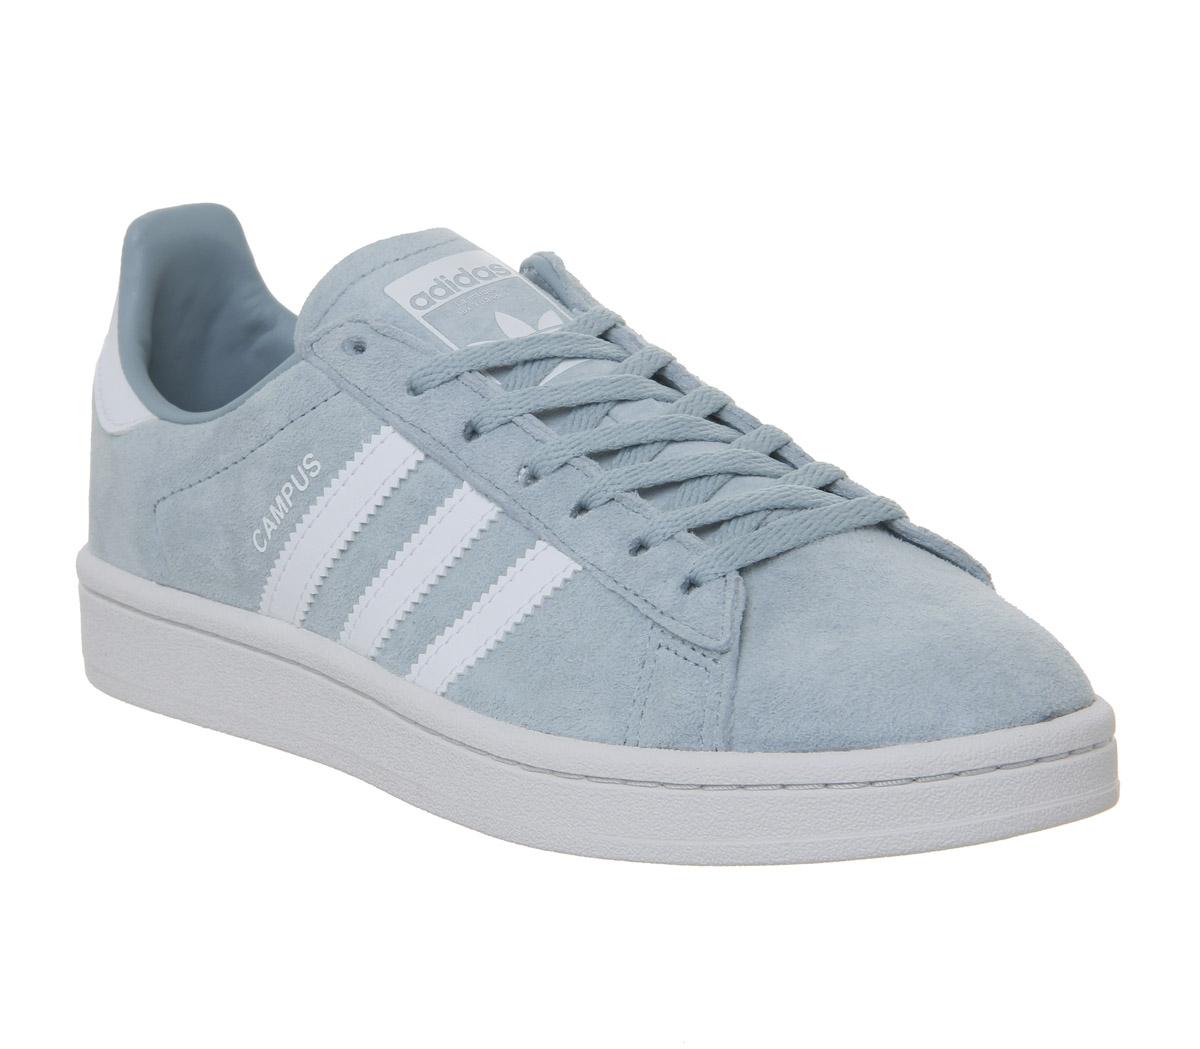 adidas Campus Trainers Ash Grey White 